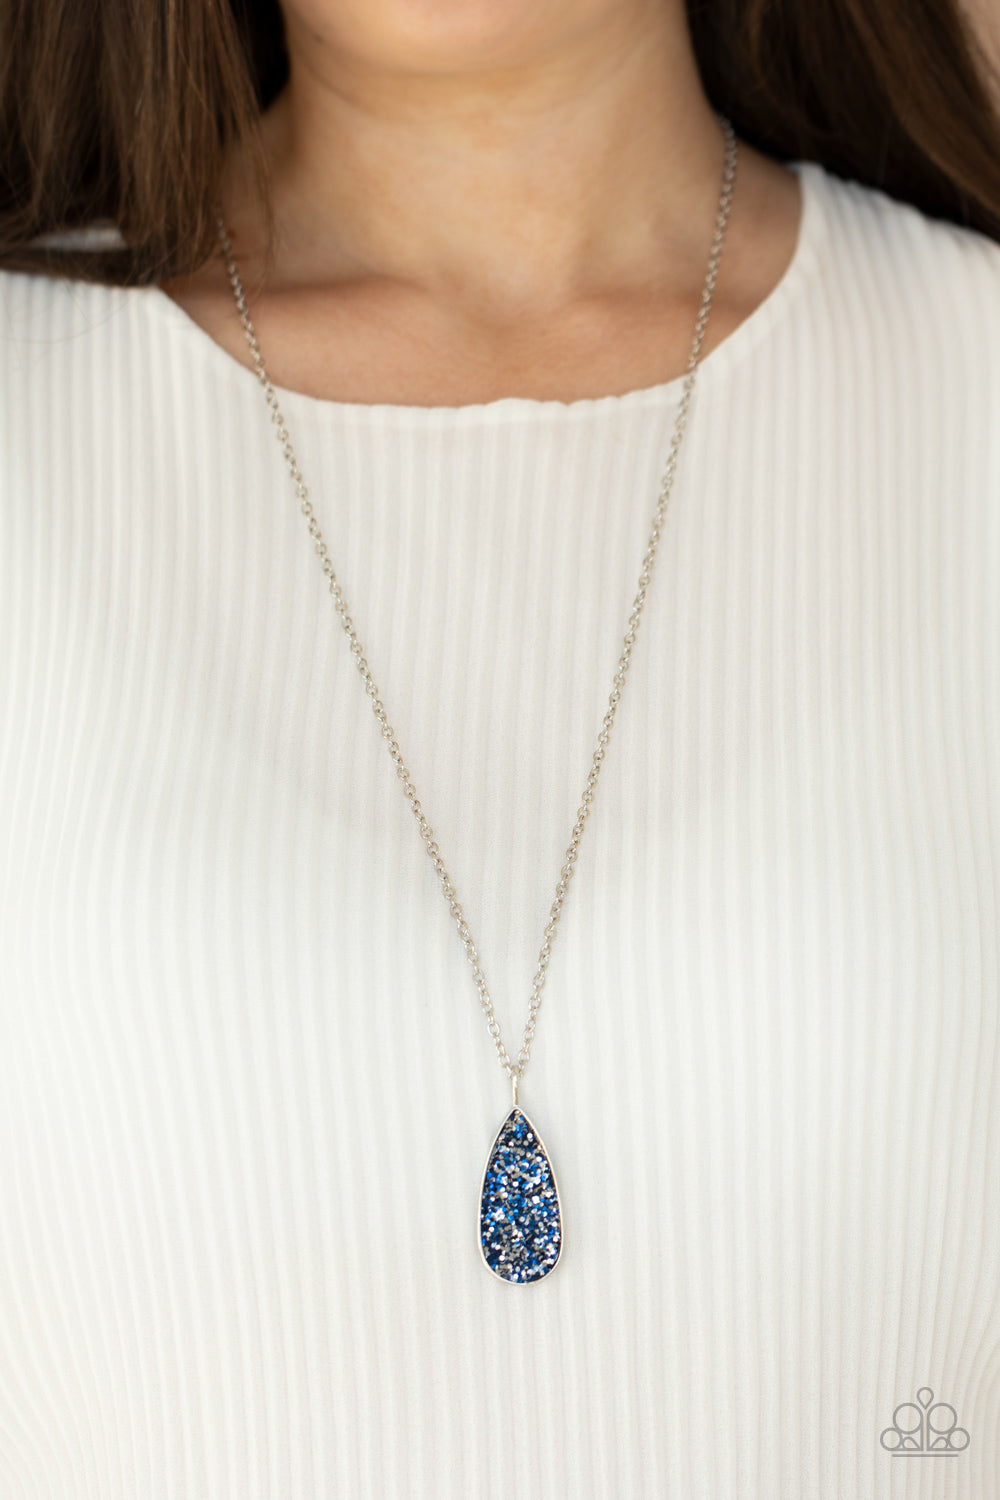 Daily Dose of Sparkle - blue - Paparazzi necklace